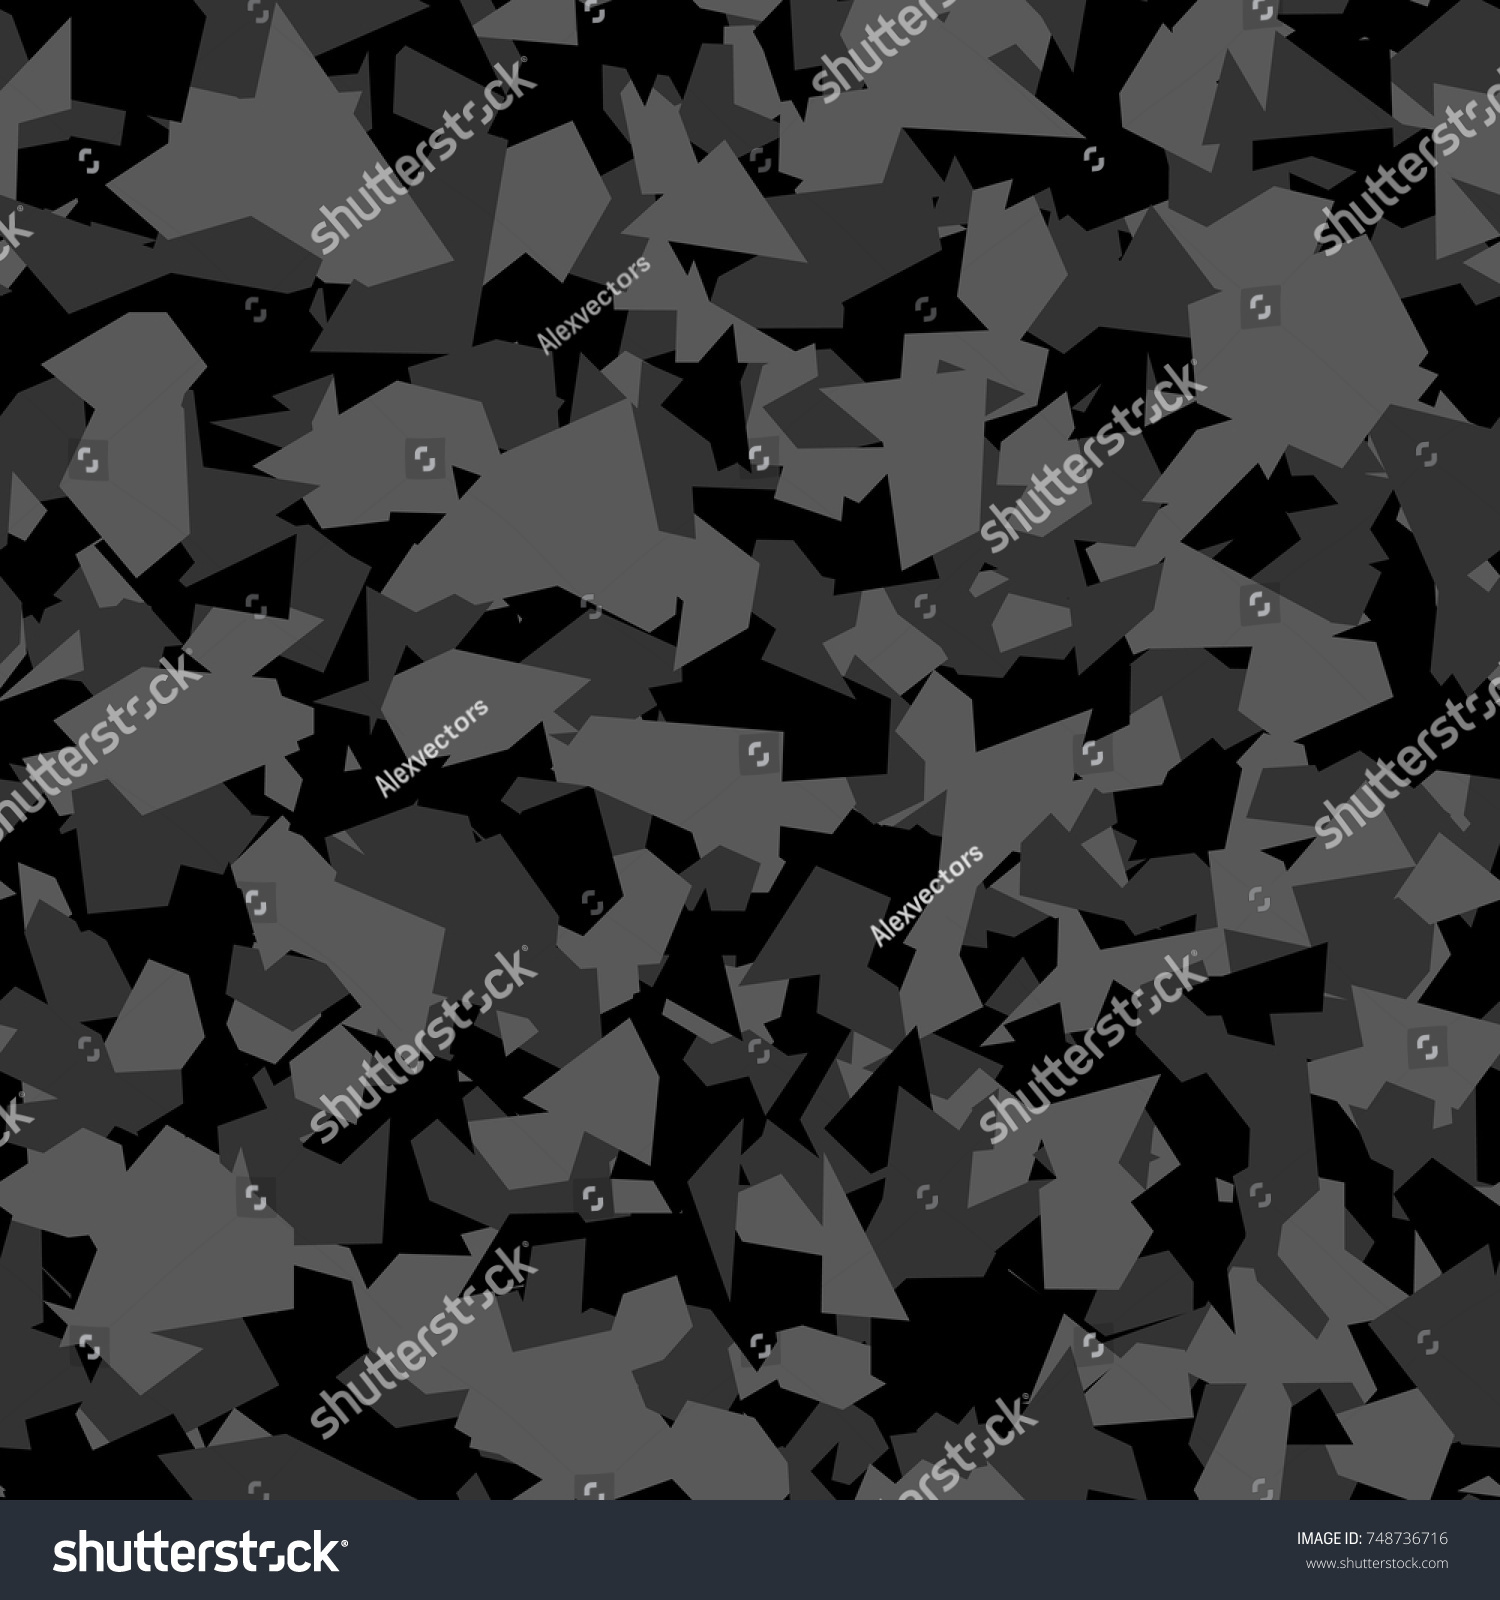 SVG of Camouflage seamless pattern. Vector geometric camo background with monochrome black chaotic texture. svg